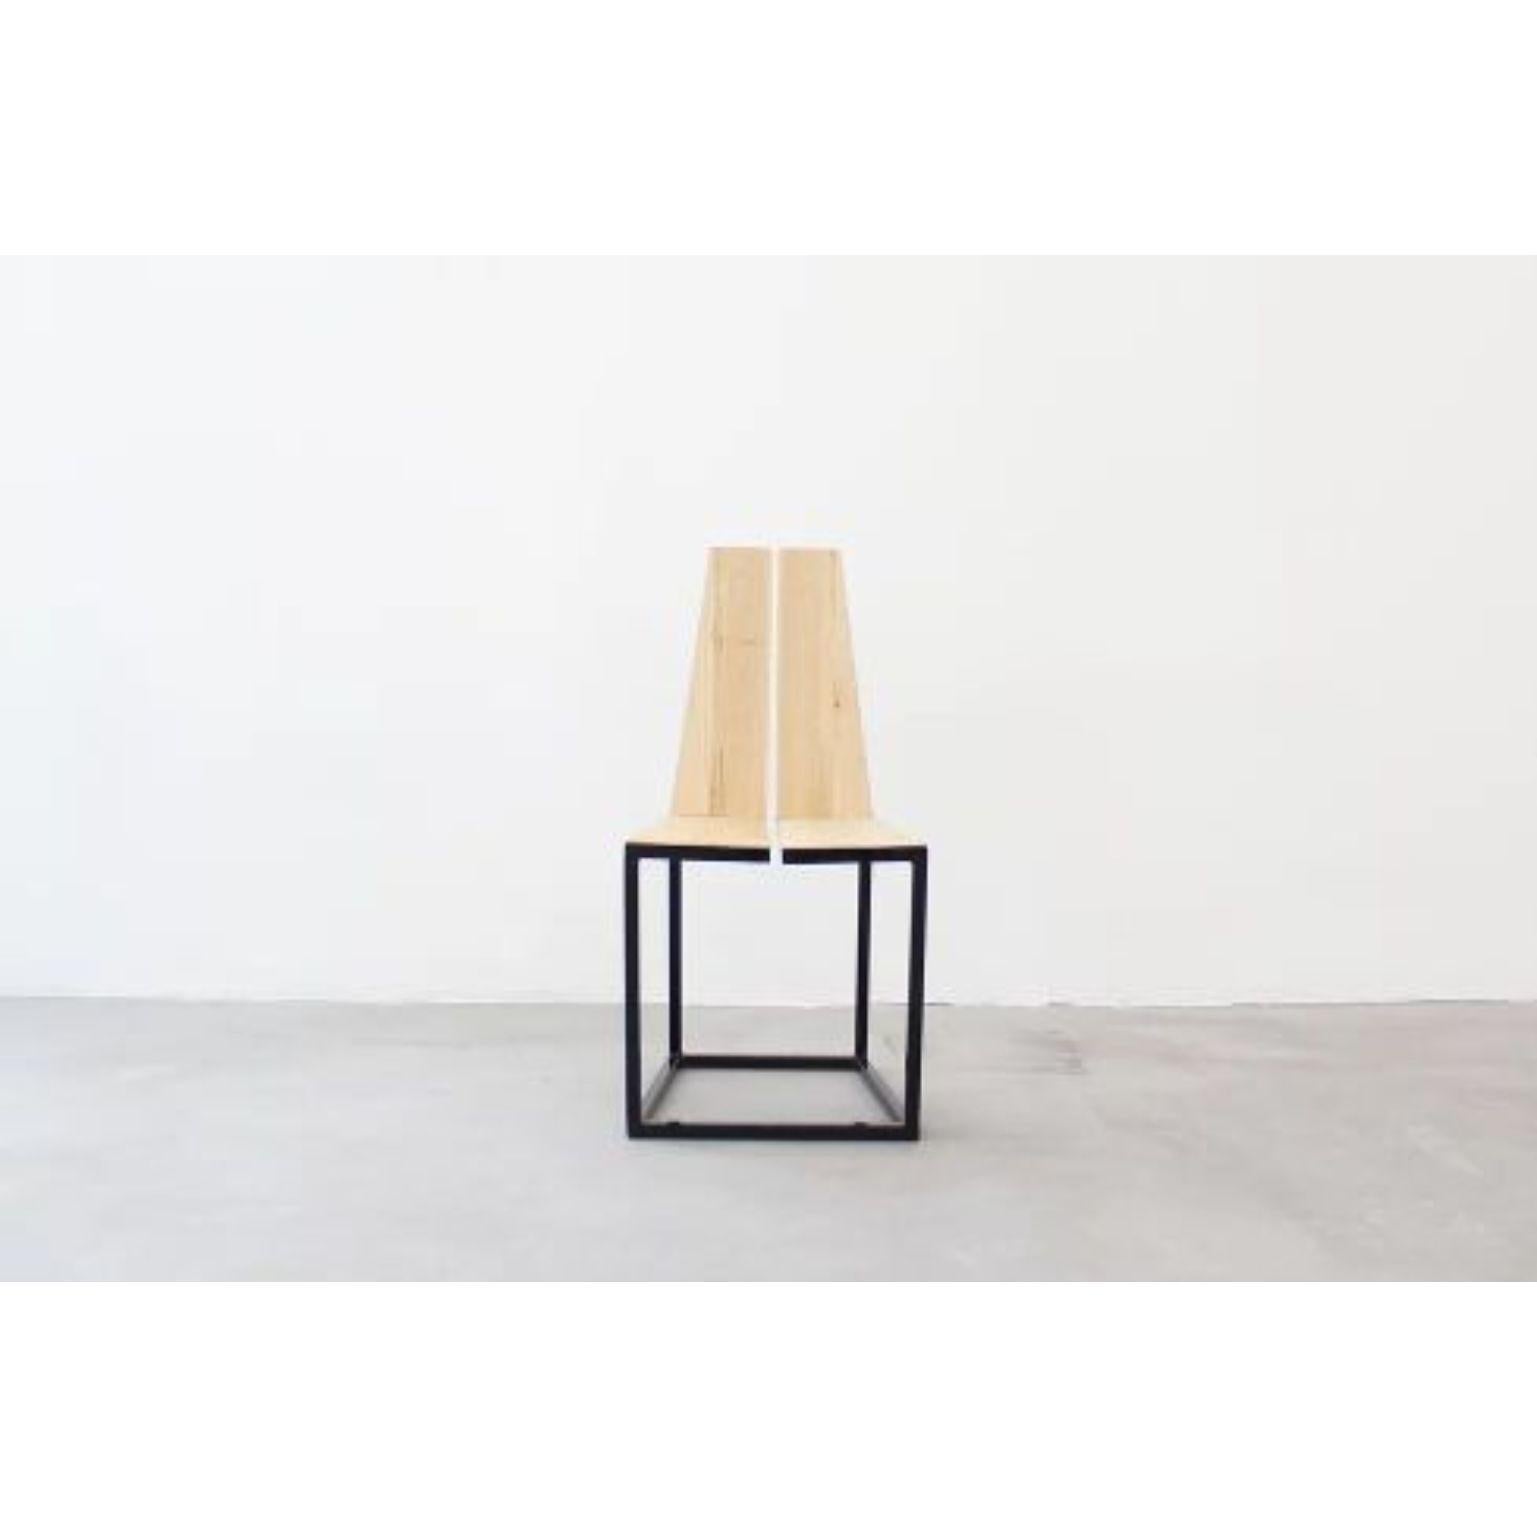 Simmis chair by La Cube
Madrid, 2016
Materials: Iron, chesnut
Dimensions: 90 x 45 x 45 cm

The Simmis chair plays with its symmetry from different perspectives. On one hand, there is the symmetry between the wood parts, highlighted by a central